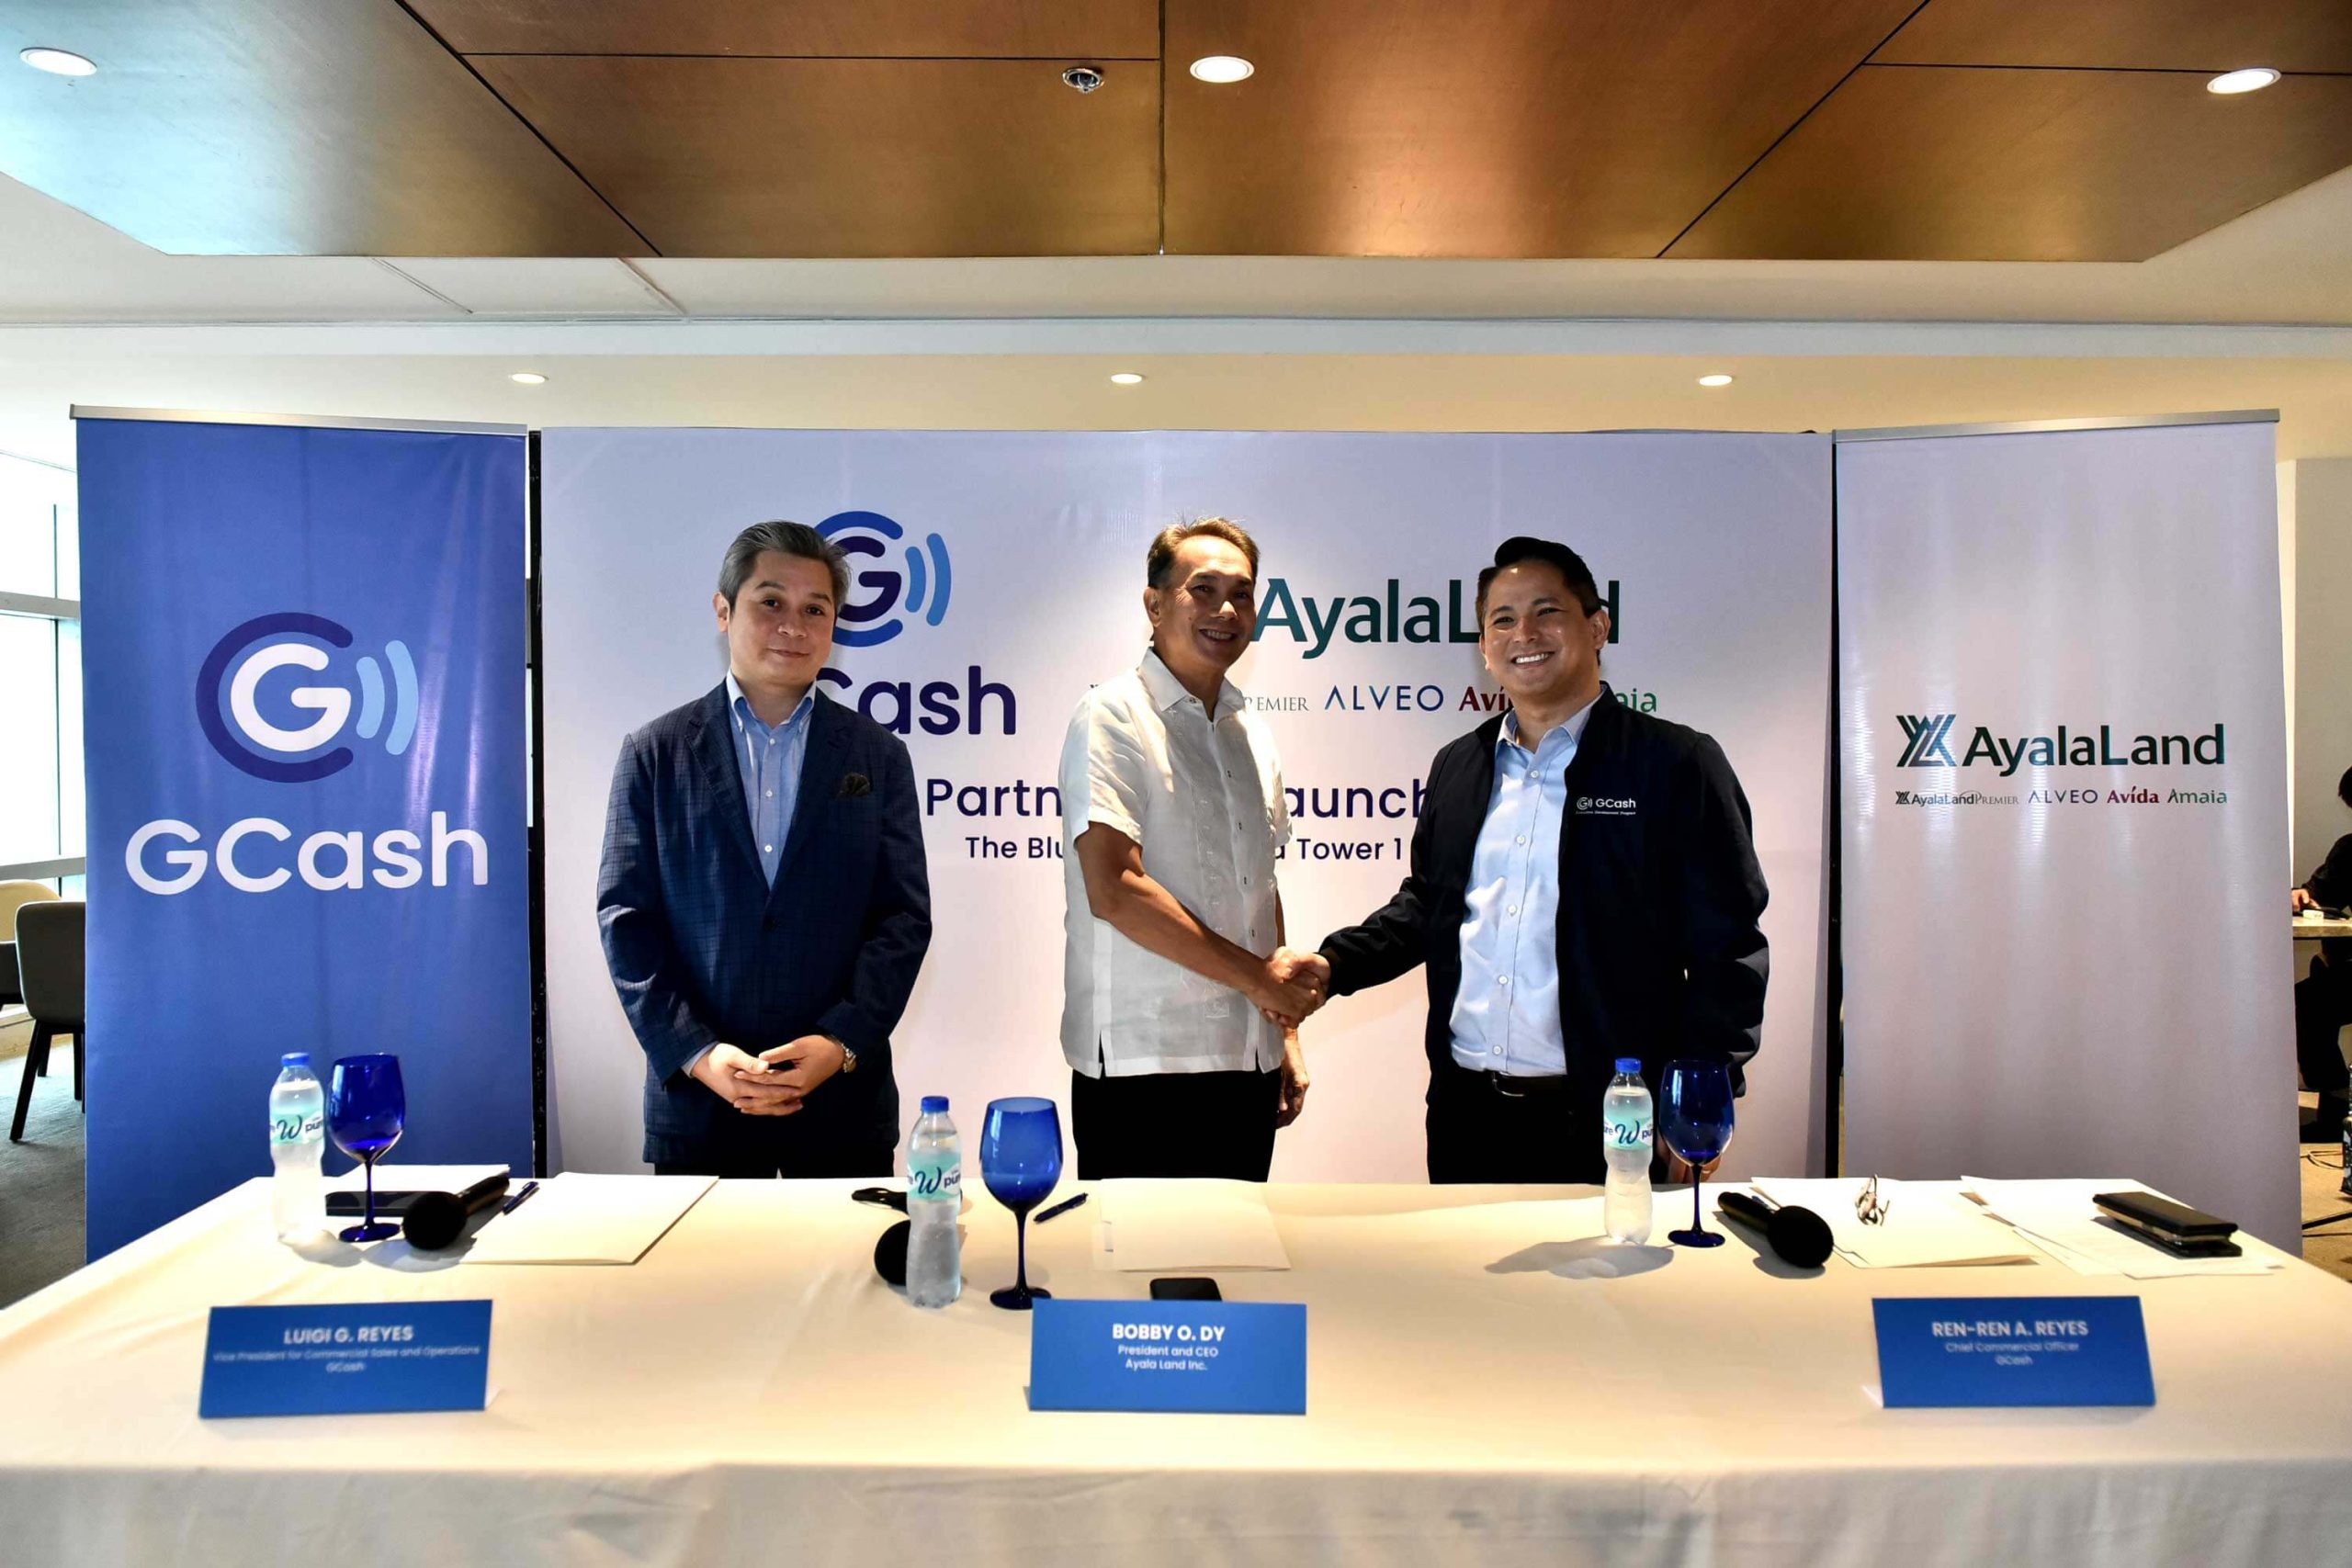 Executives from GCash and Ayala Land signed Monday a memorandum of agreement (MOA) to make Ayala Land residential units available on the GCash App's GLife service. Among the representatives from GCash are Luigi Reyes, Vice President for Commercial Sales and Operations (left) and Chief Commercial Officer Ren-Ren Reyes (right). They are joined by Ayala Land President and CEO Bobby Dy (center).